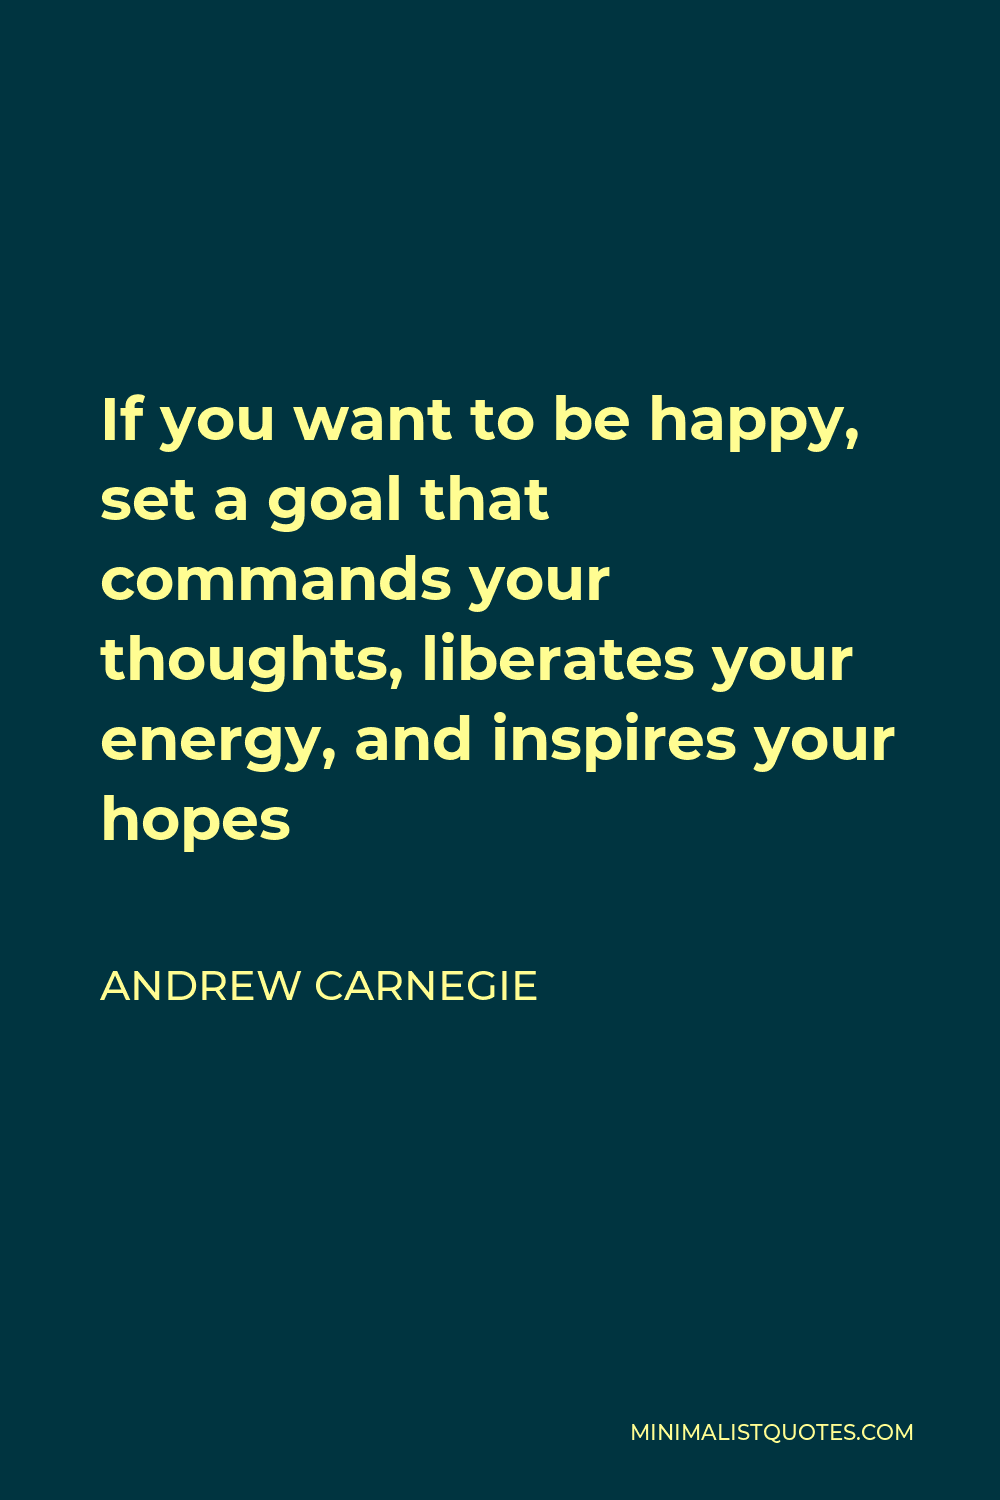 Andrew Carnegie Quote: If you want to be happy, set a goal that ...